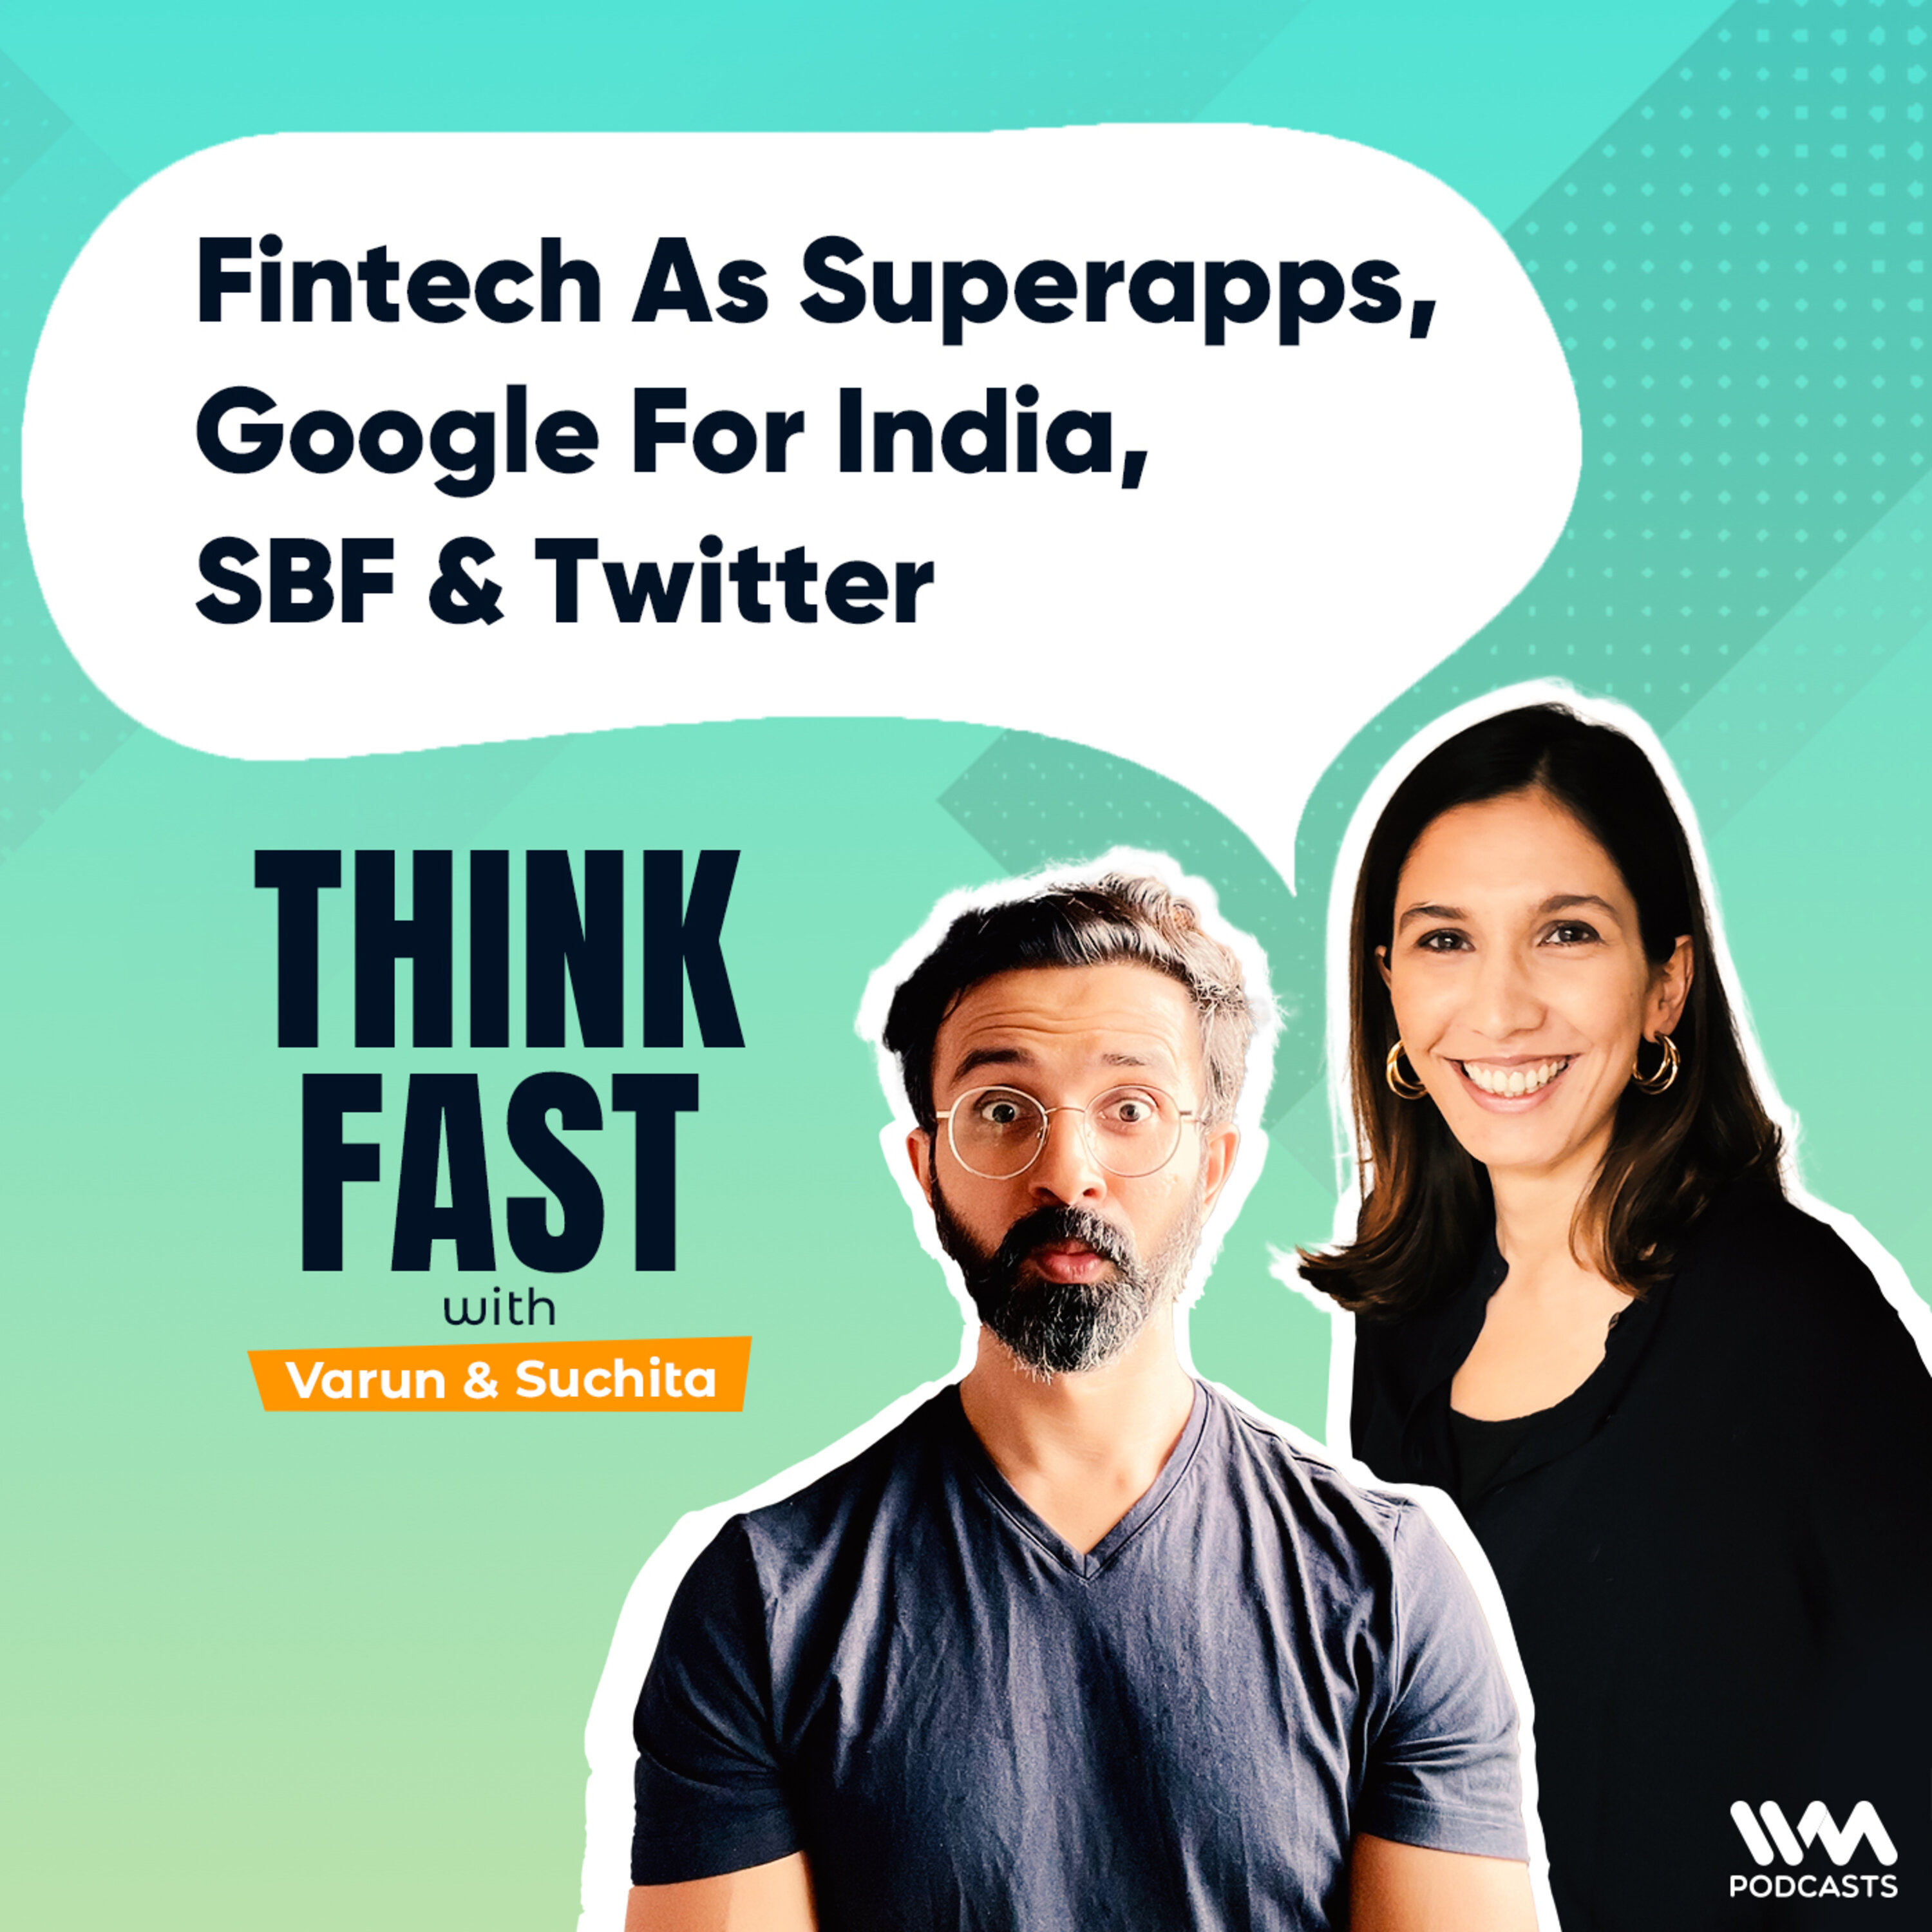 Fintech As Superapps, Google For India, SBF & Twitter ft. Vidur Singhal